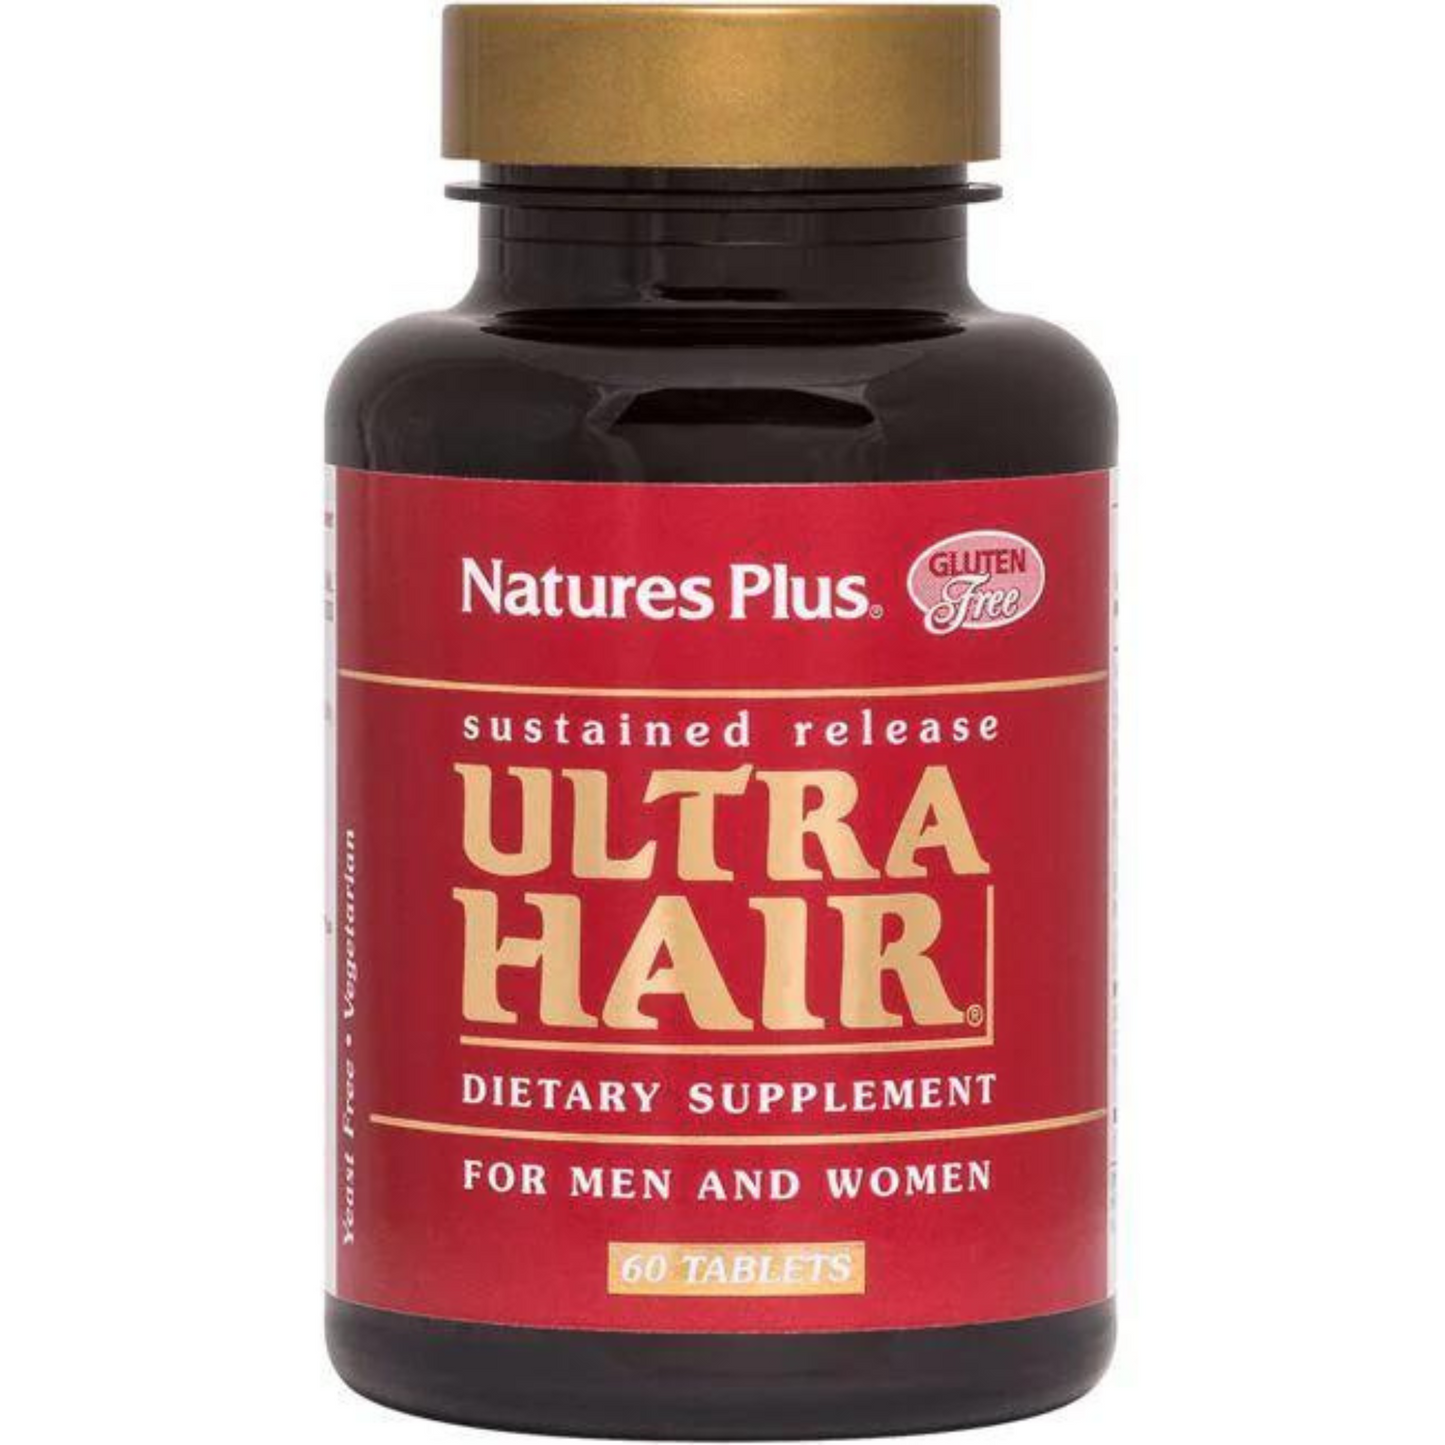 Primary Image of Ultra Hair Plus (60 count)